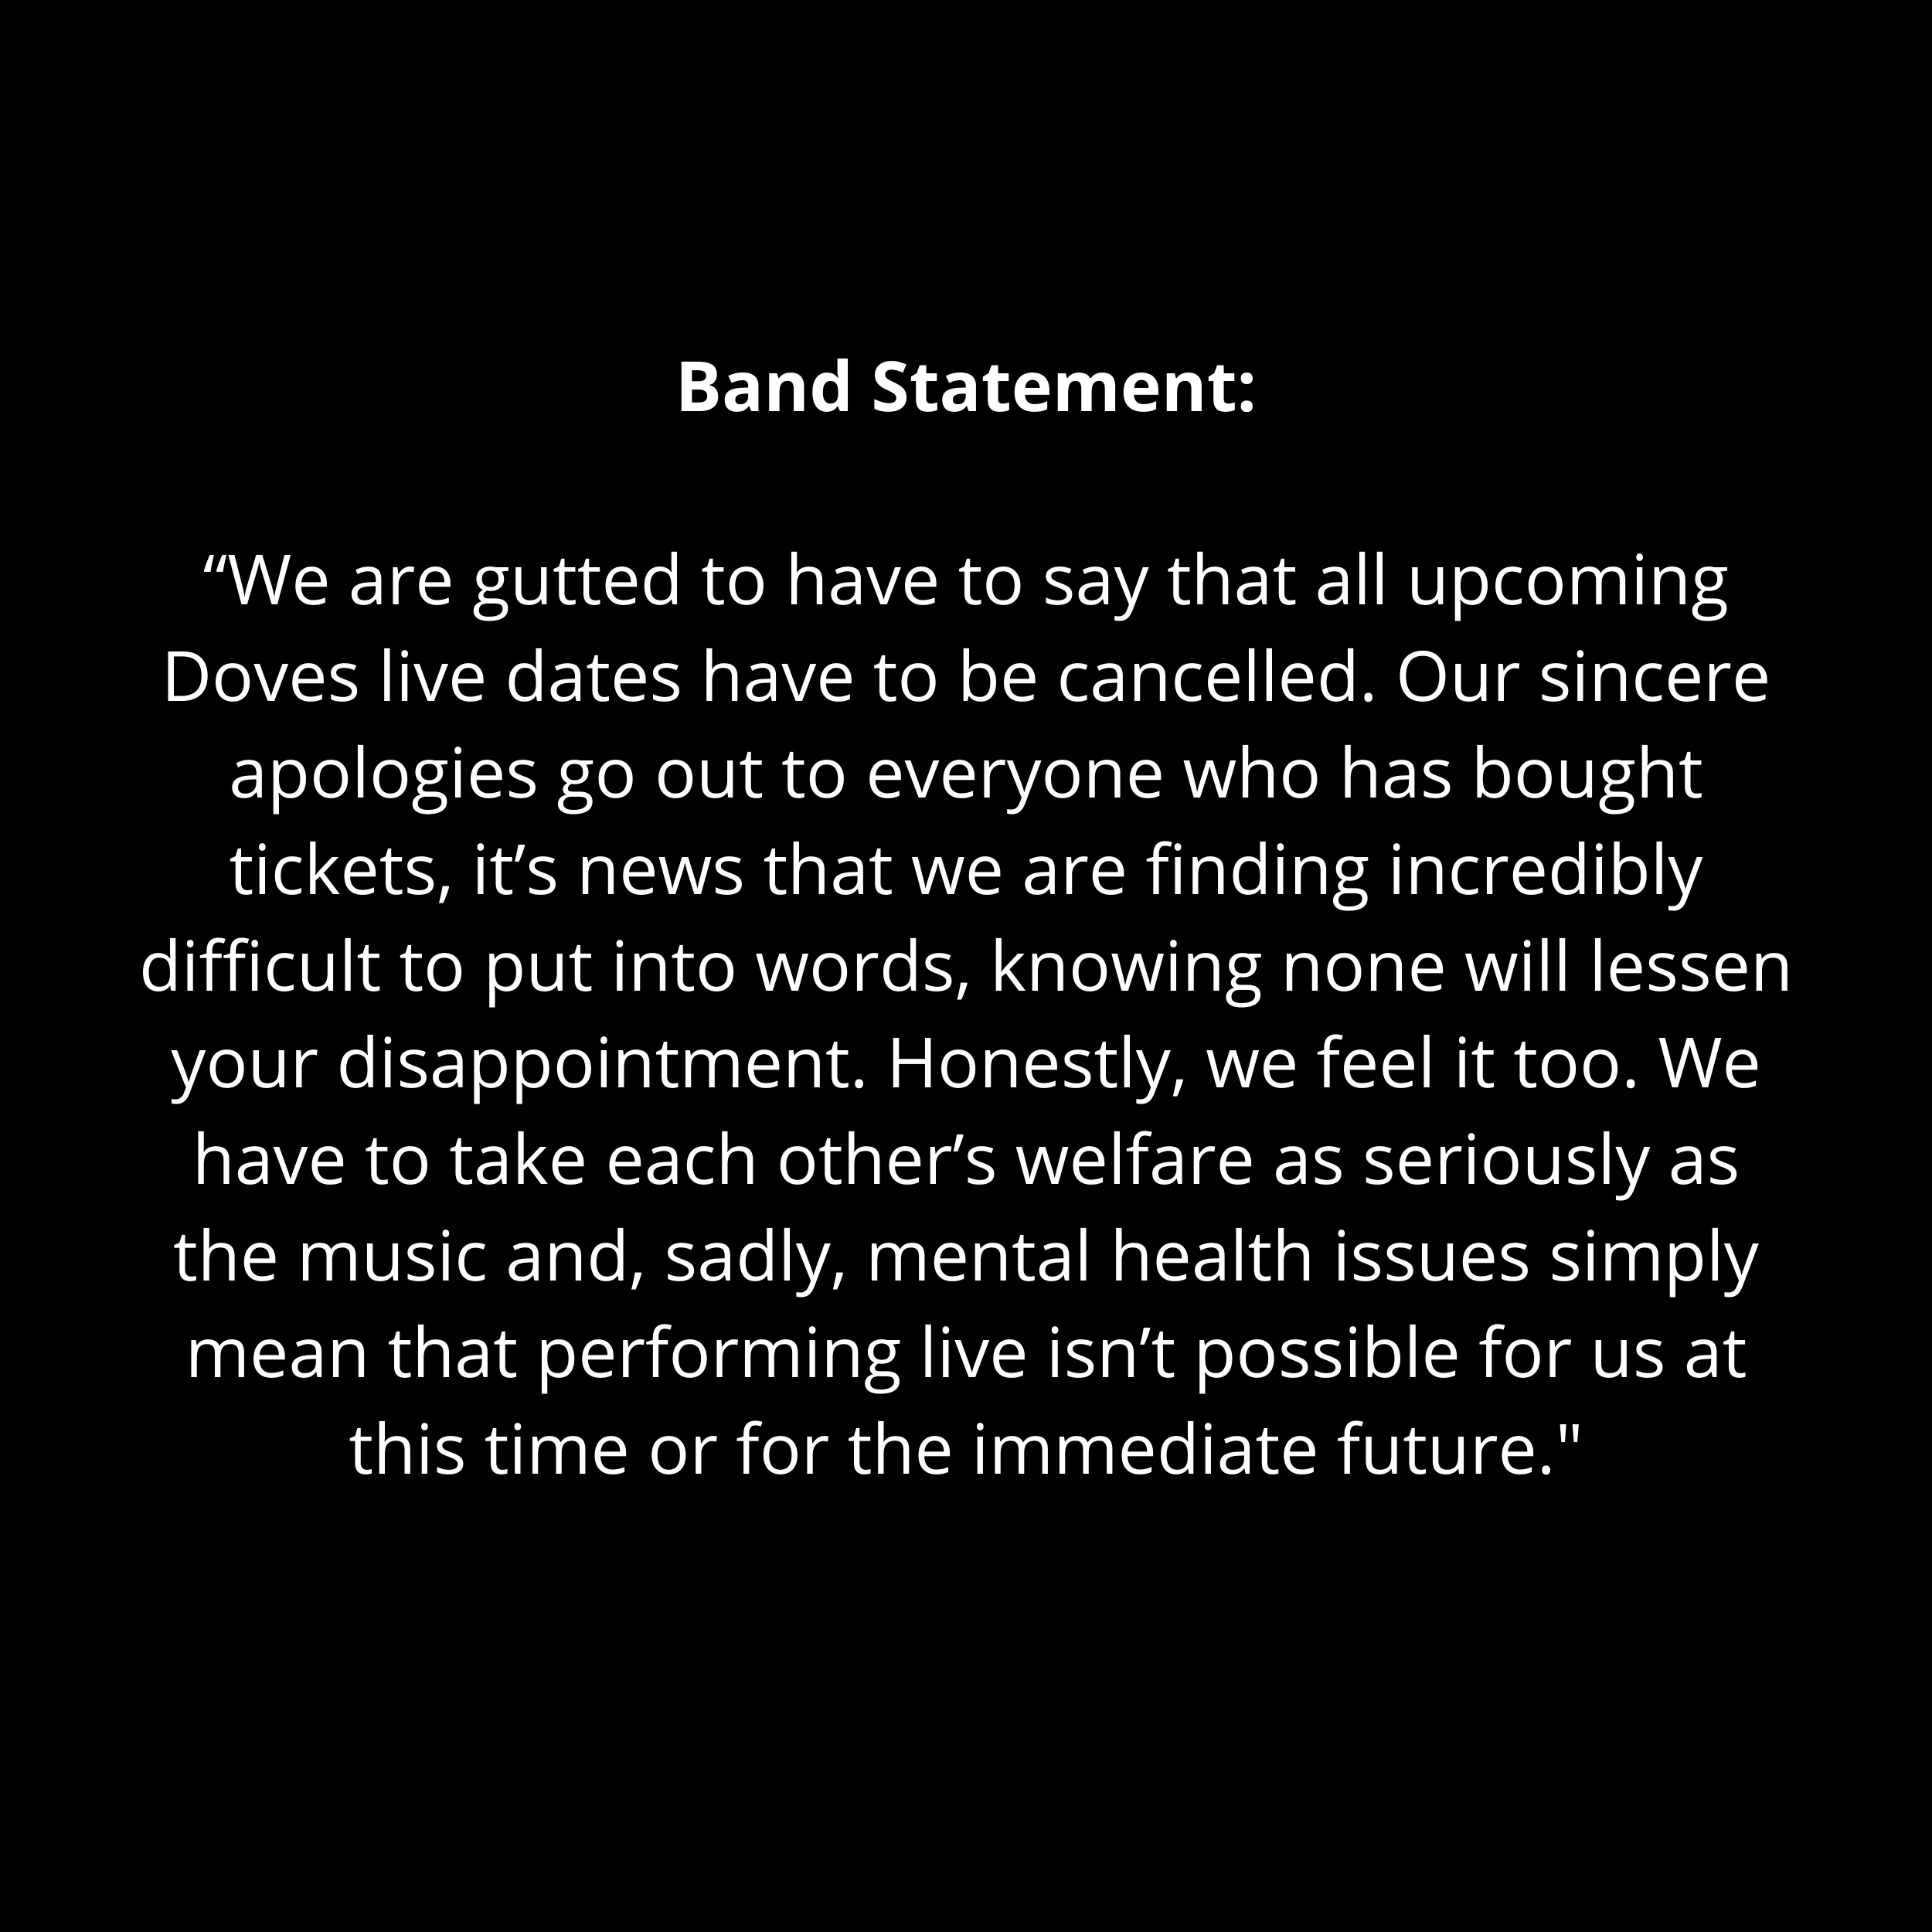 Image for article: Statements from the band and Jimi